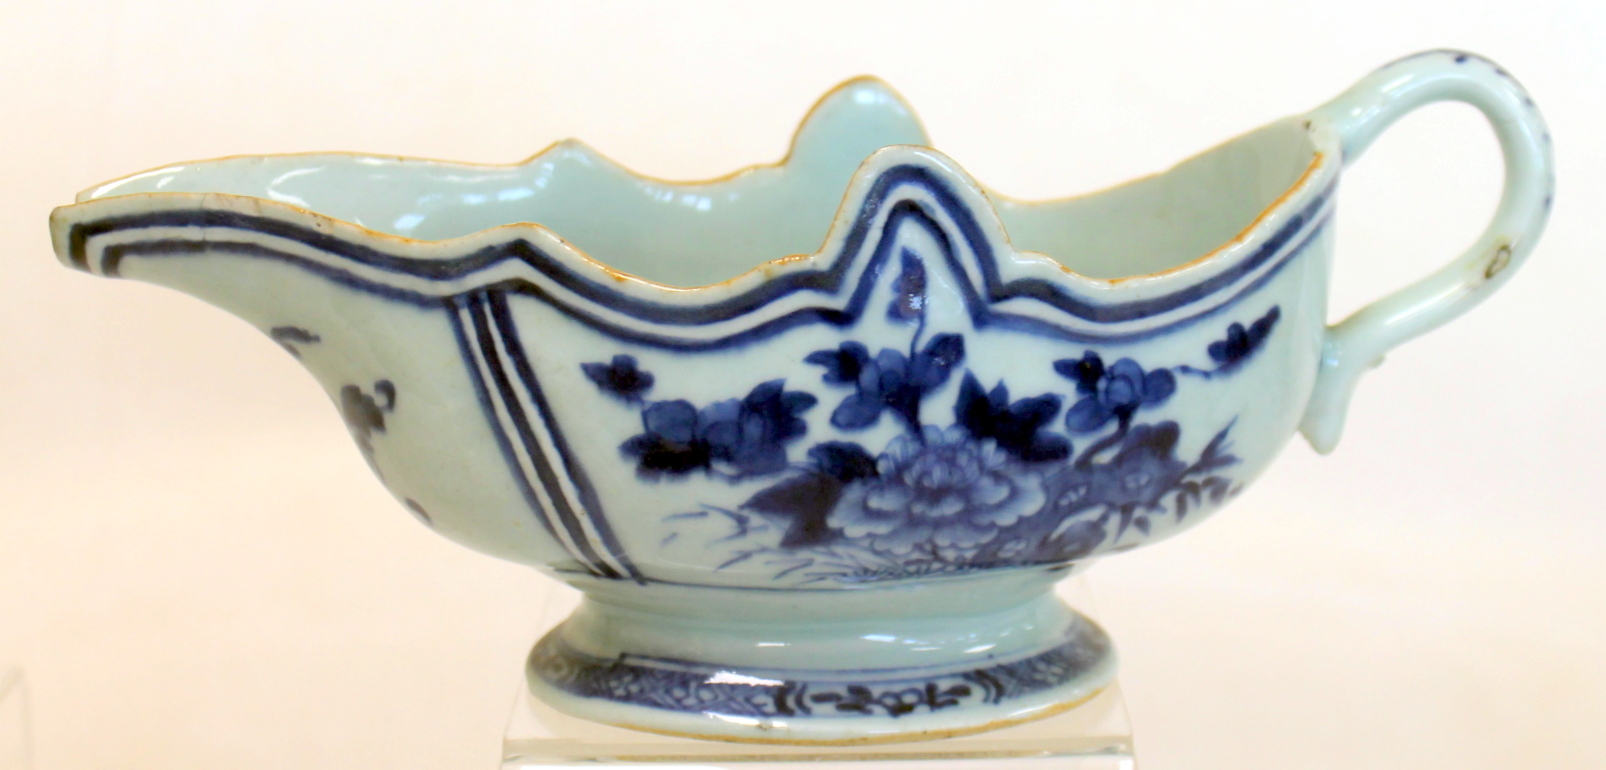 Pair of 18th century Chinese Export blue & white porcelain sauce boats, - Image 3 of 13